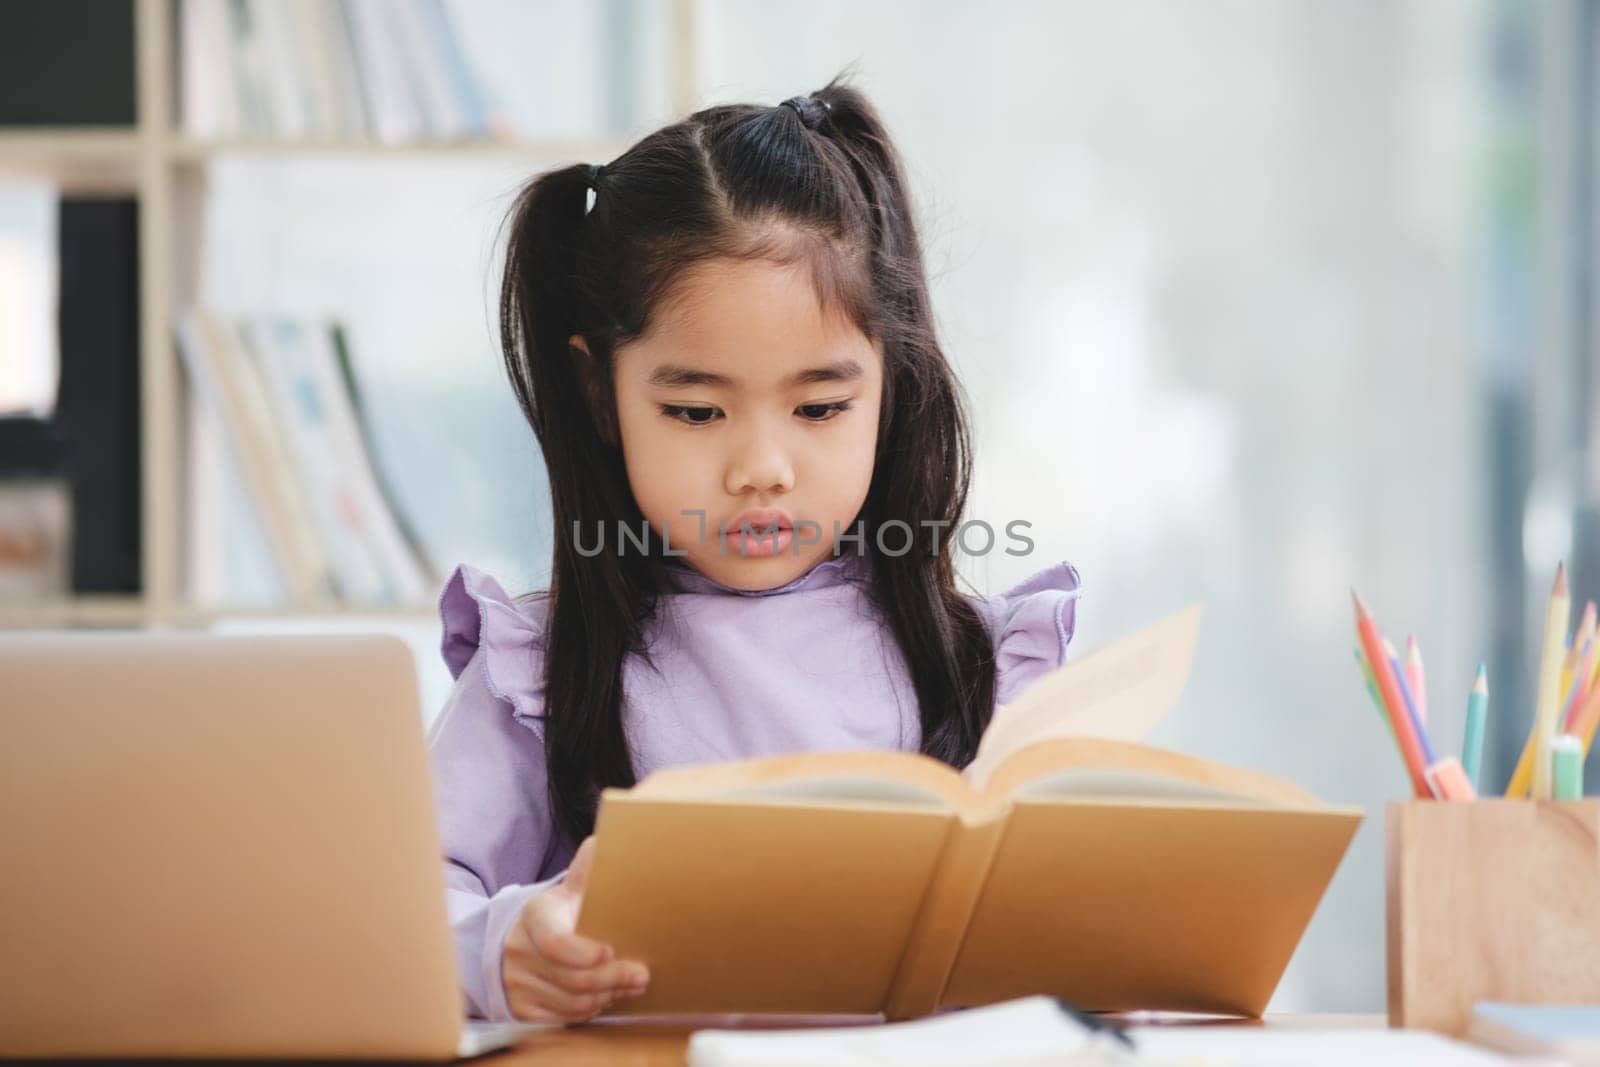 A young girl is sitting at a desk reading a book by ijeab